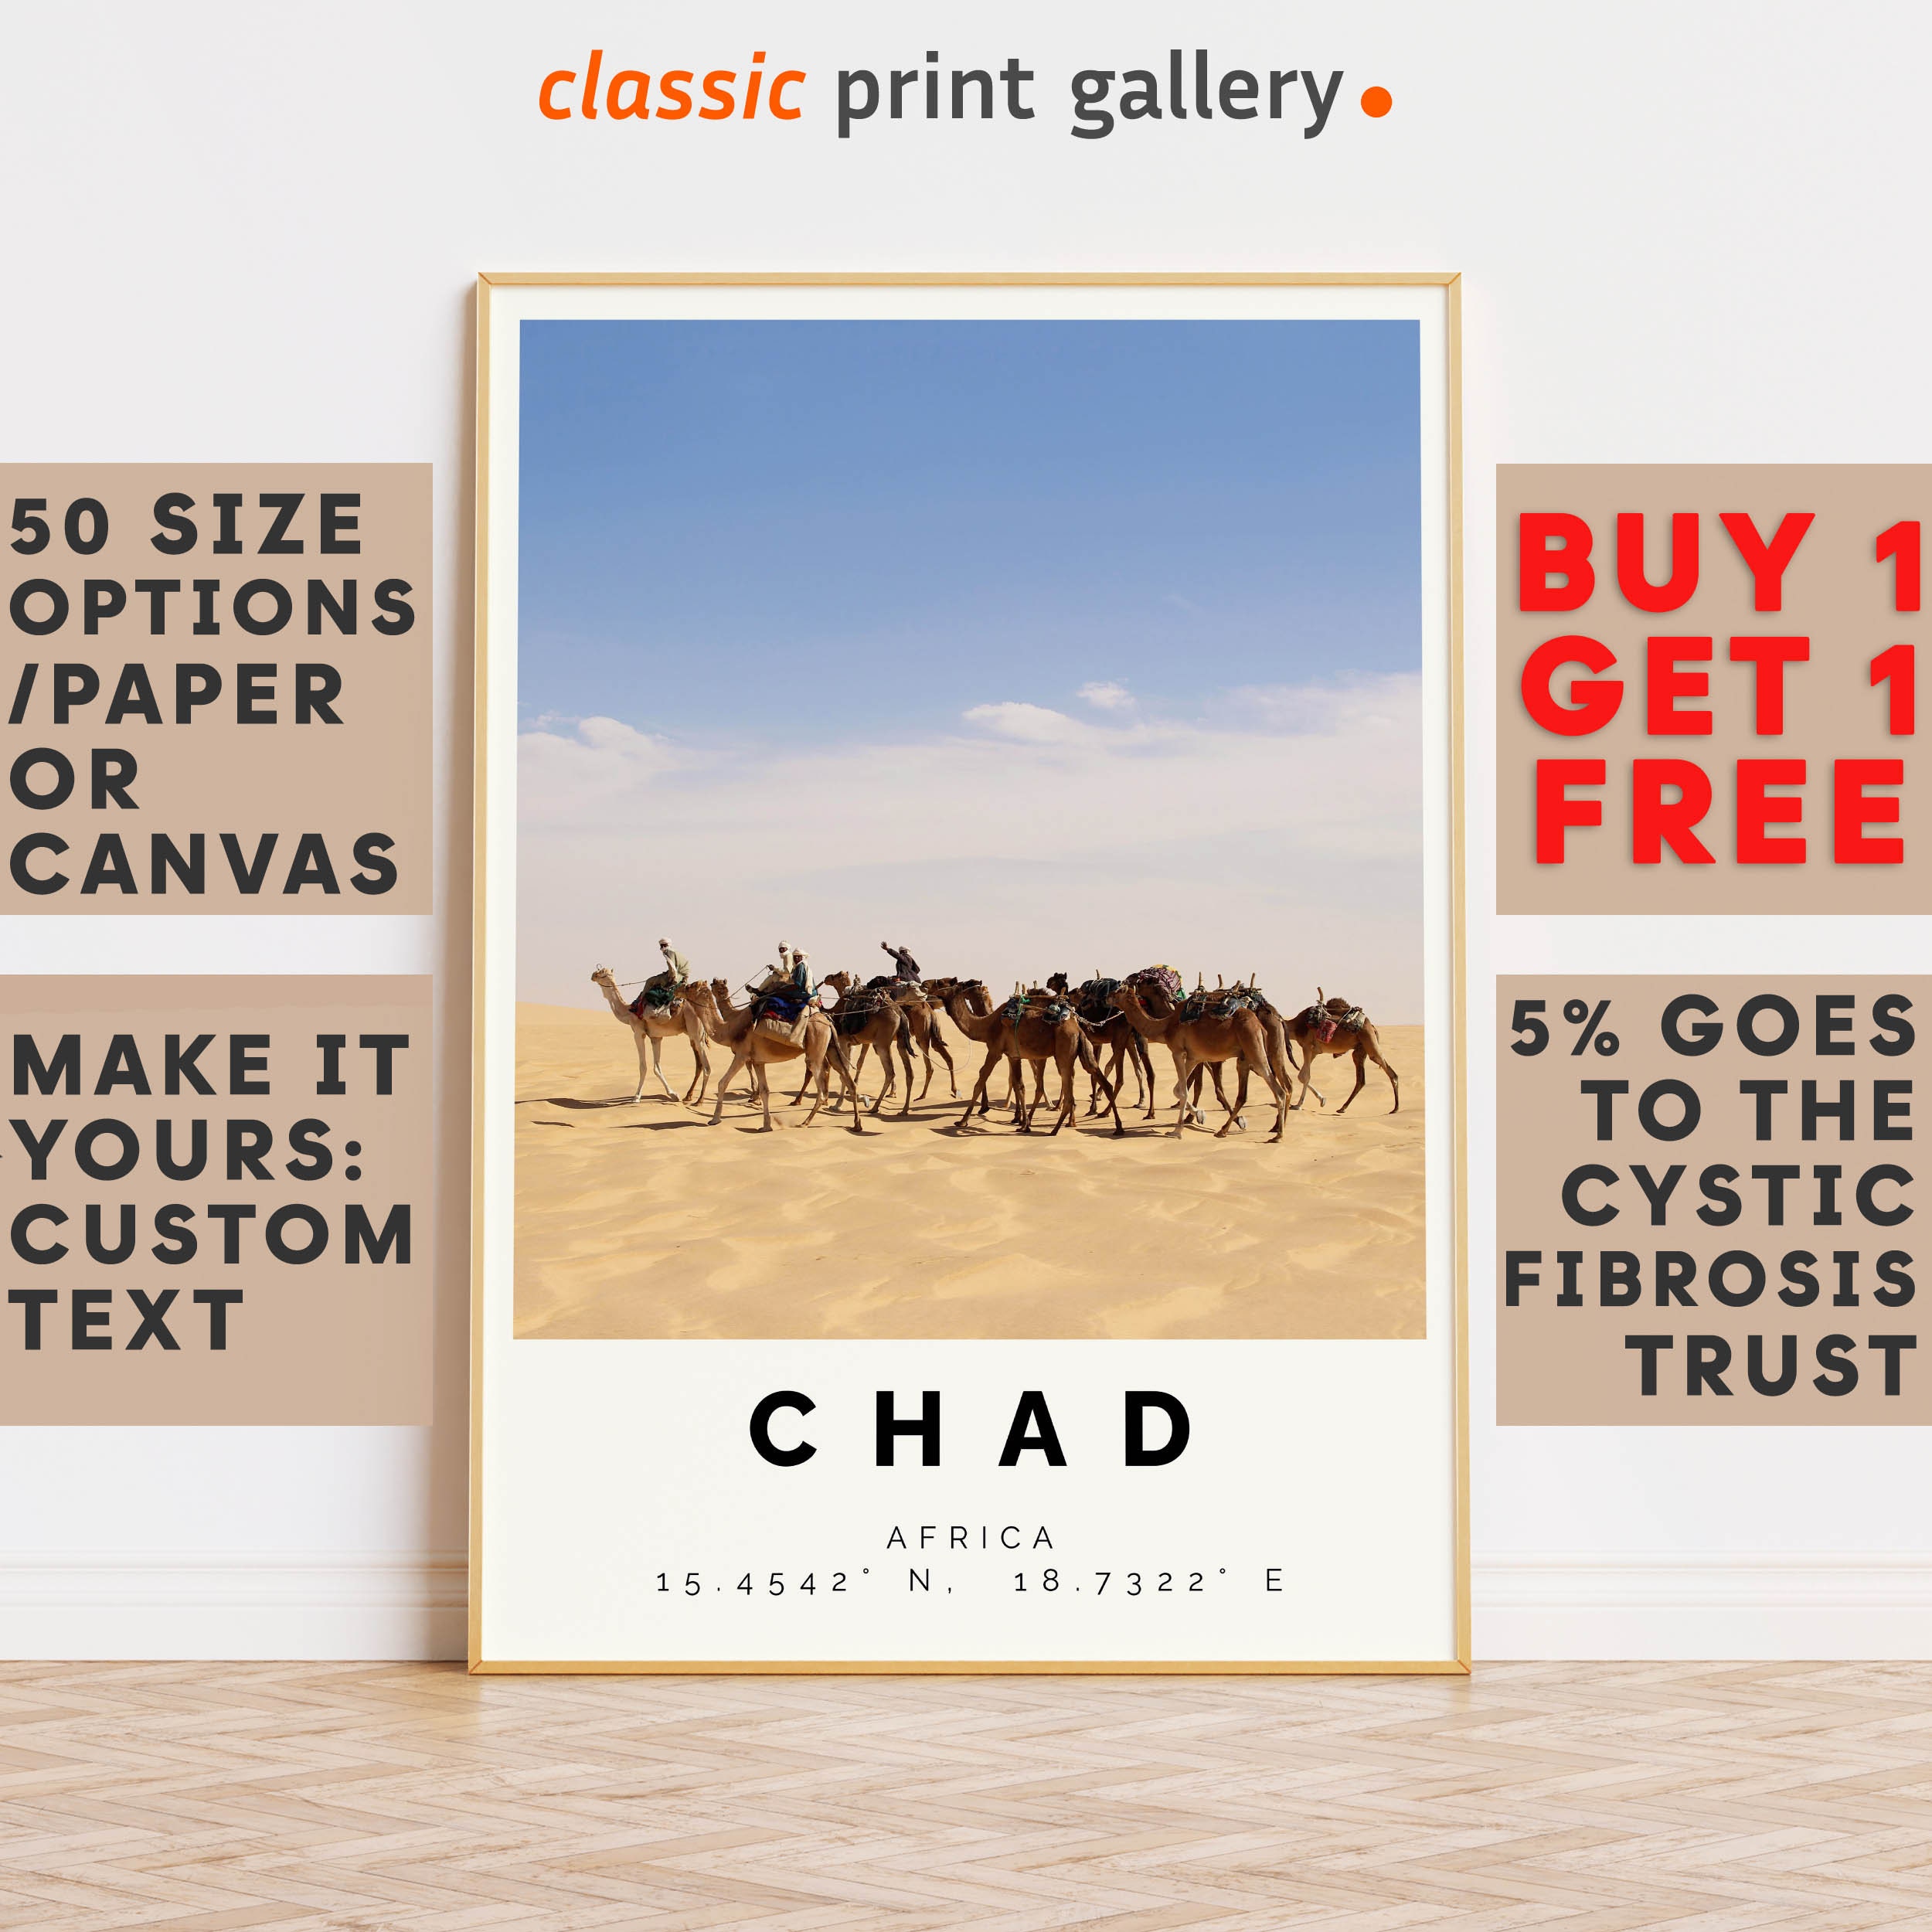 Gigachad STICKERS Giga Chad 2x2.5 Inches LOT Pack of 5 